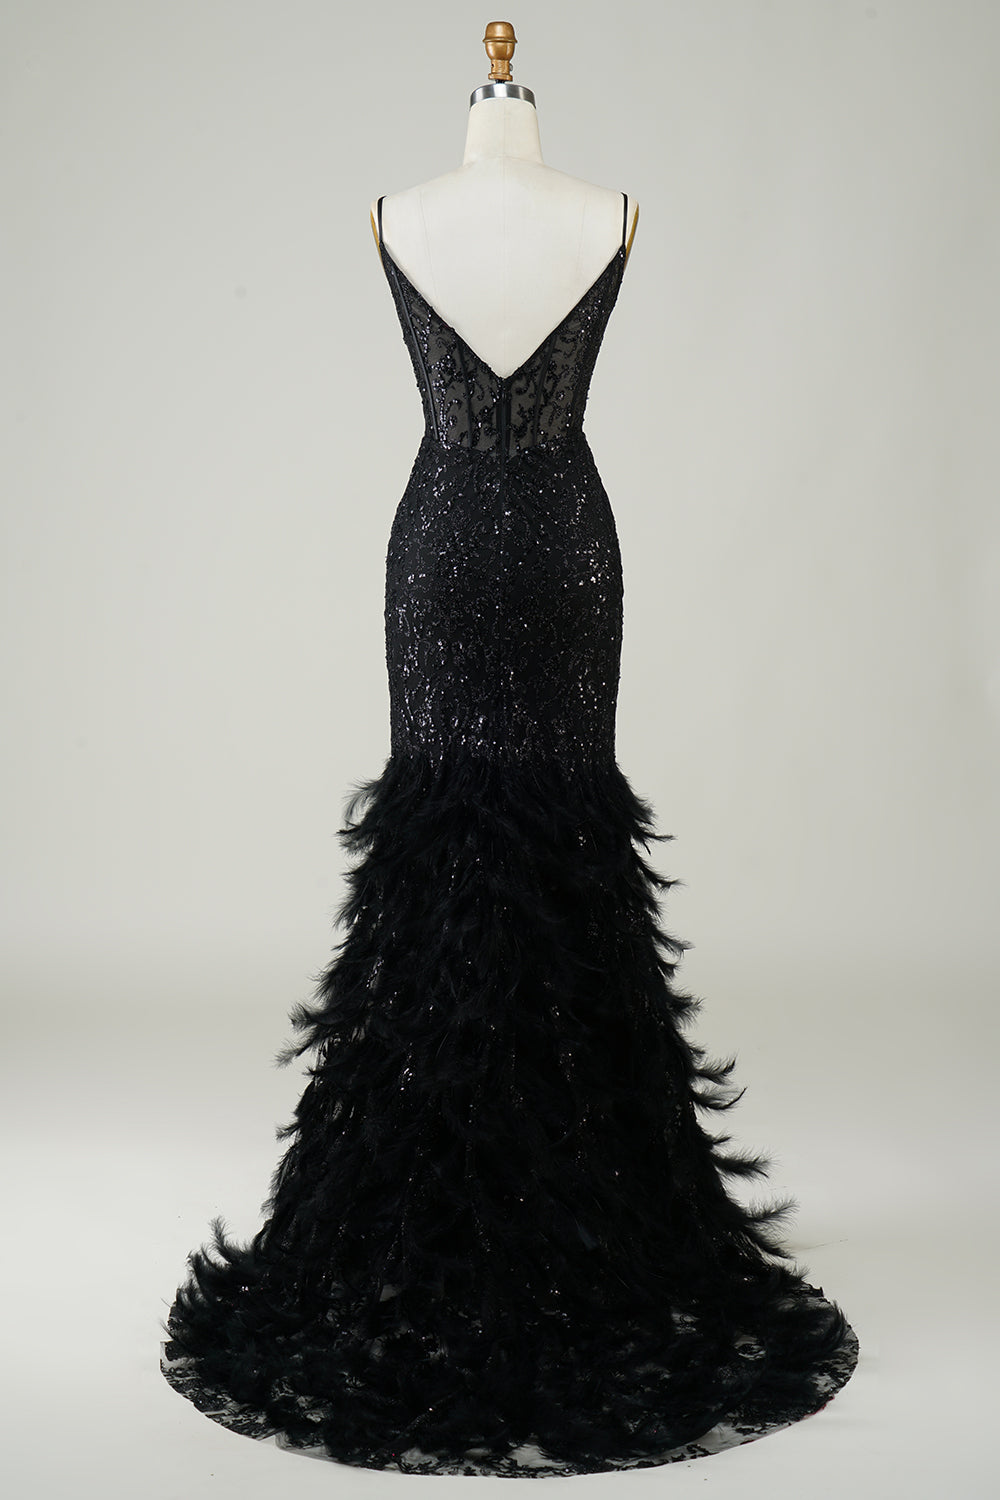 Sparkly Black Mermaid Long Sequin Prom Dress with Feathers